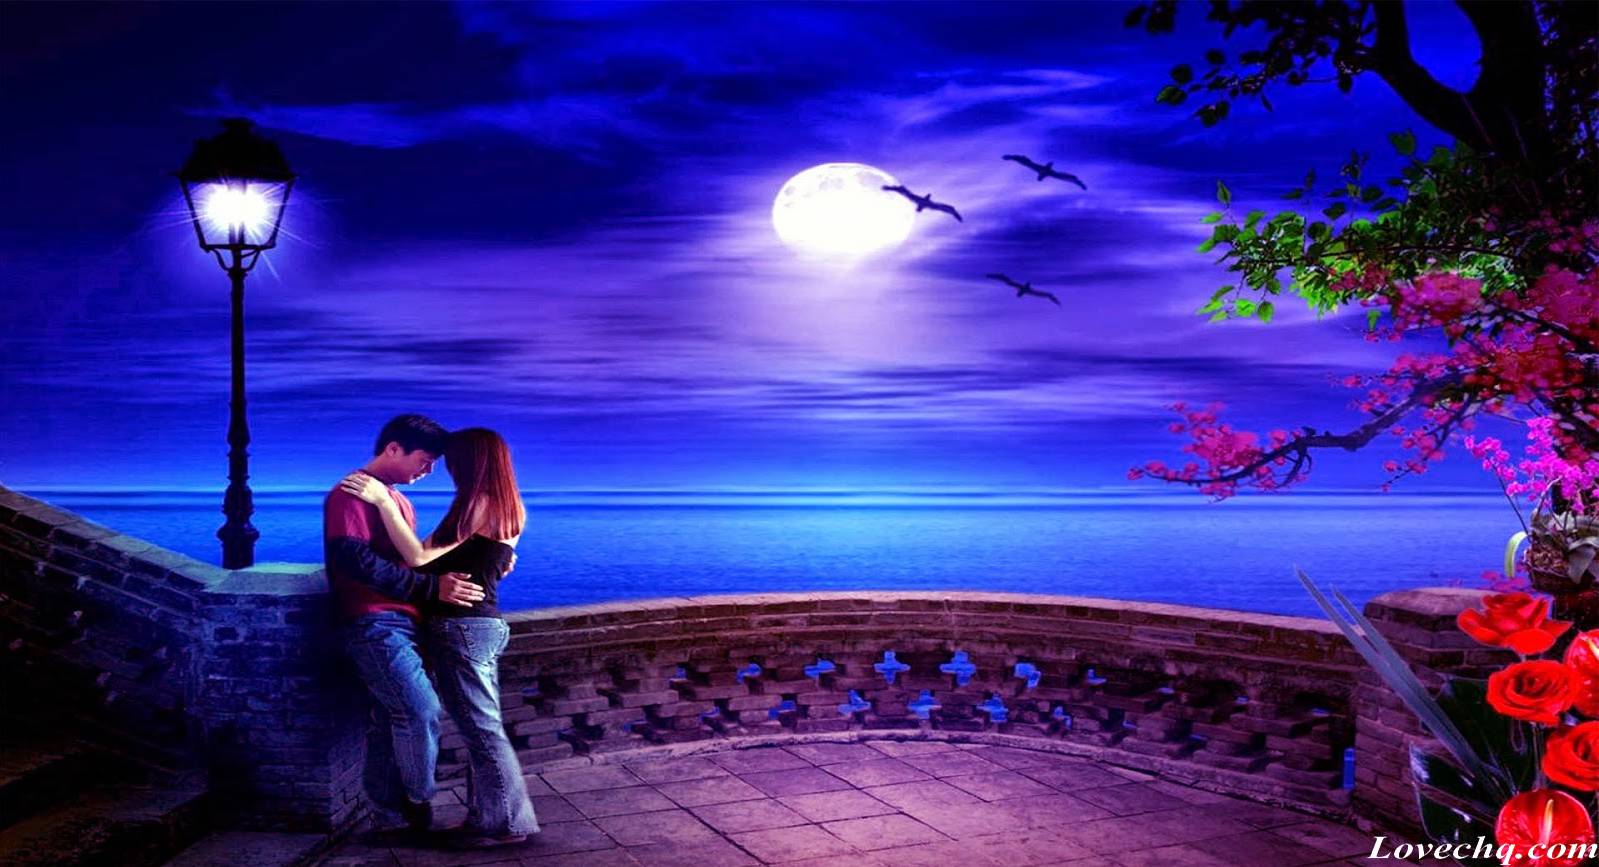 Romantic Love Hd Images Free Download 32 Background Wallpaper ...